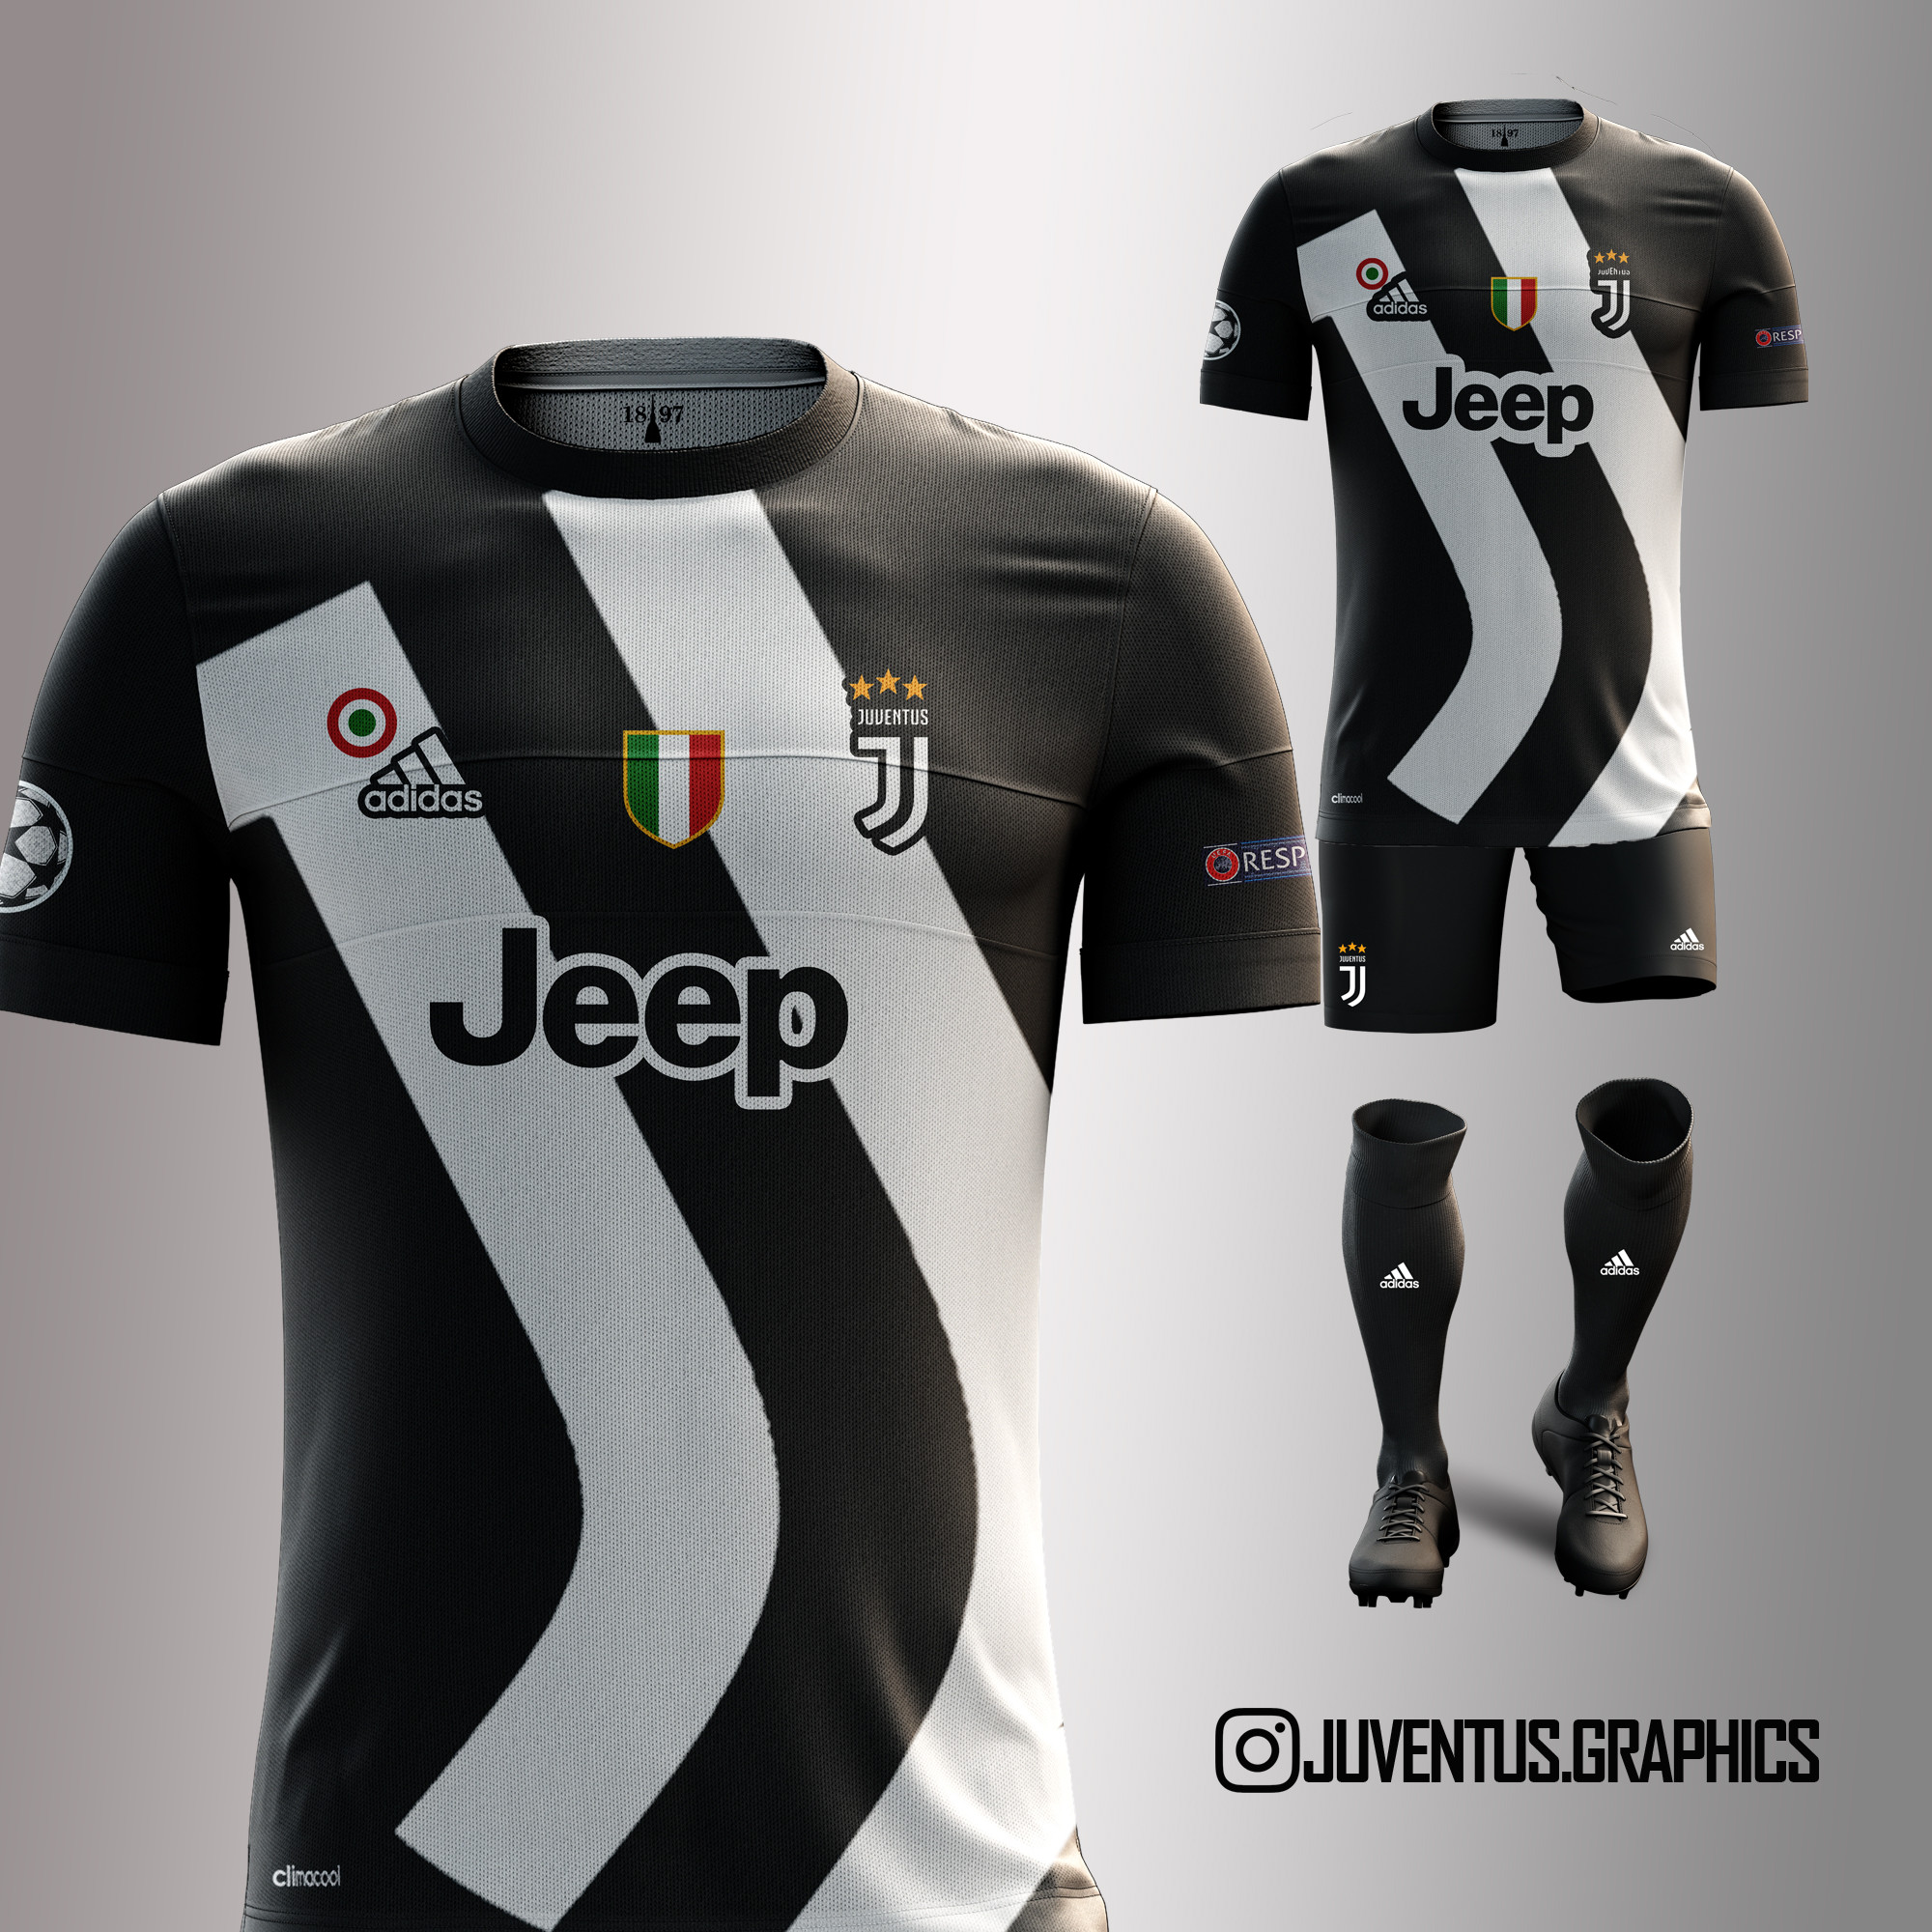 2000x2000 The 2017/2018 Juventus Jersey by Juventus.graphics -Do you like it?